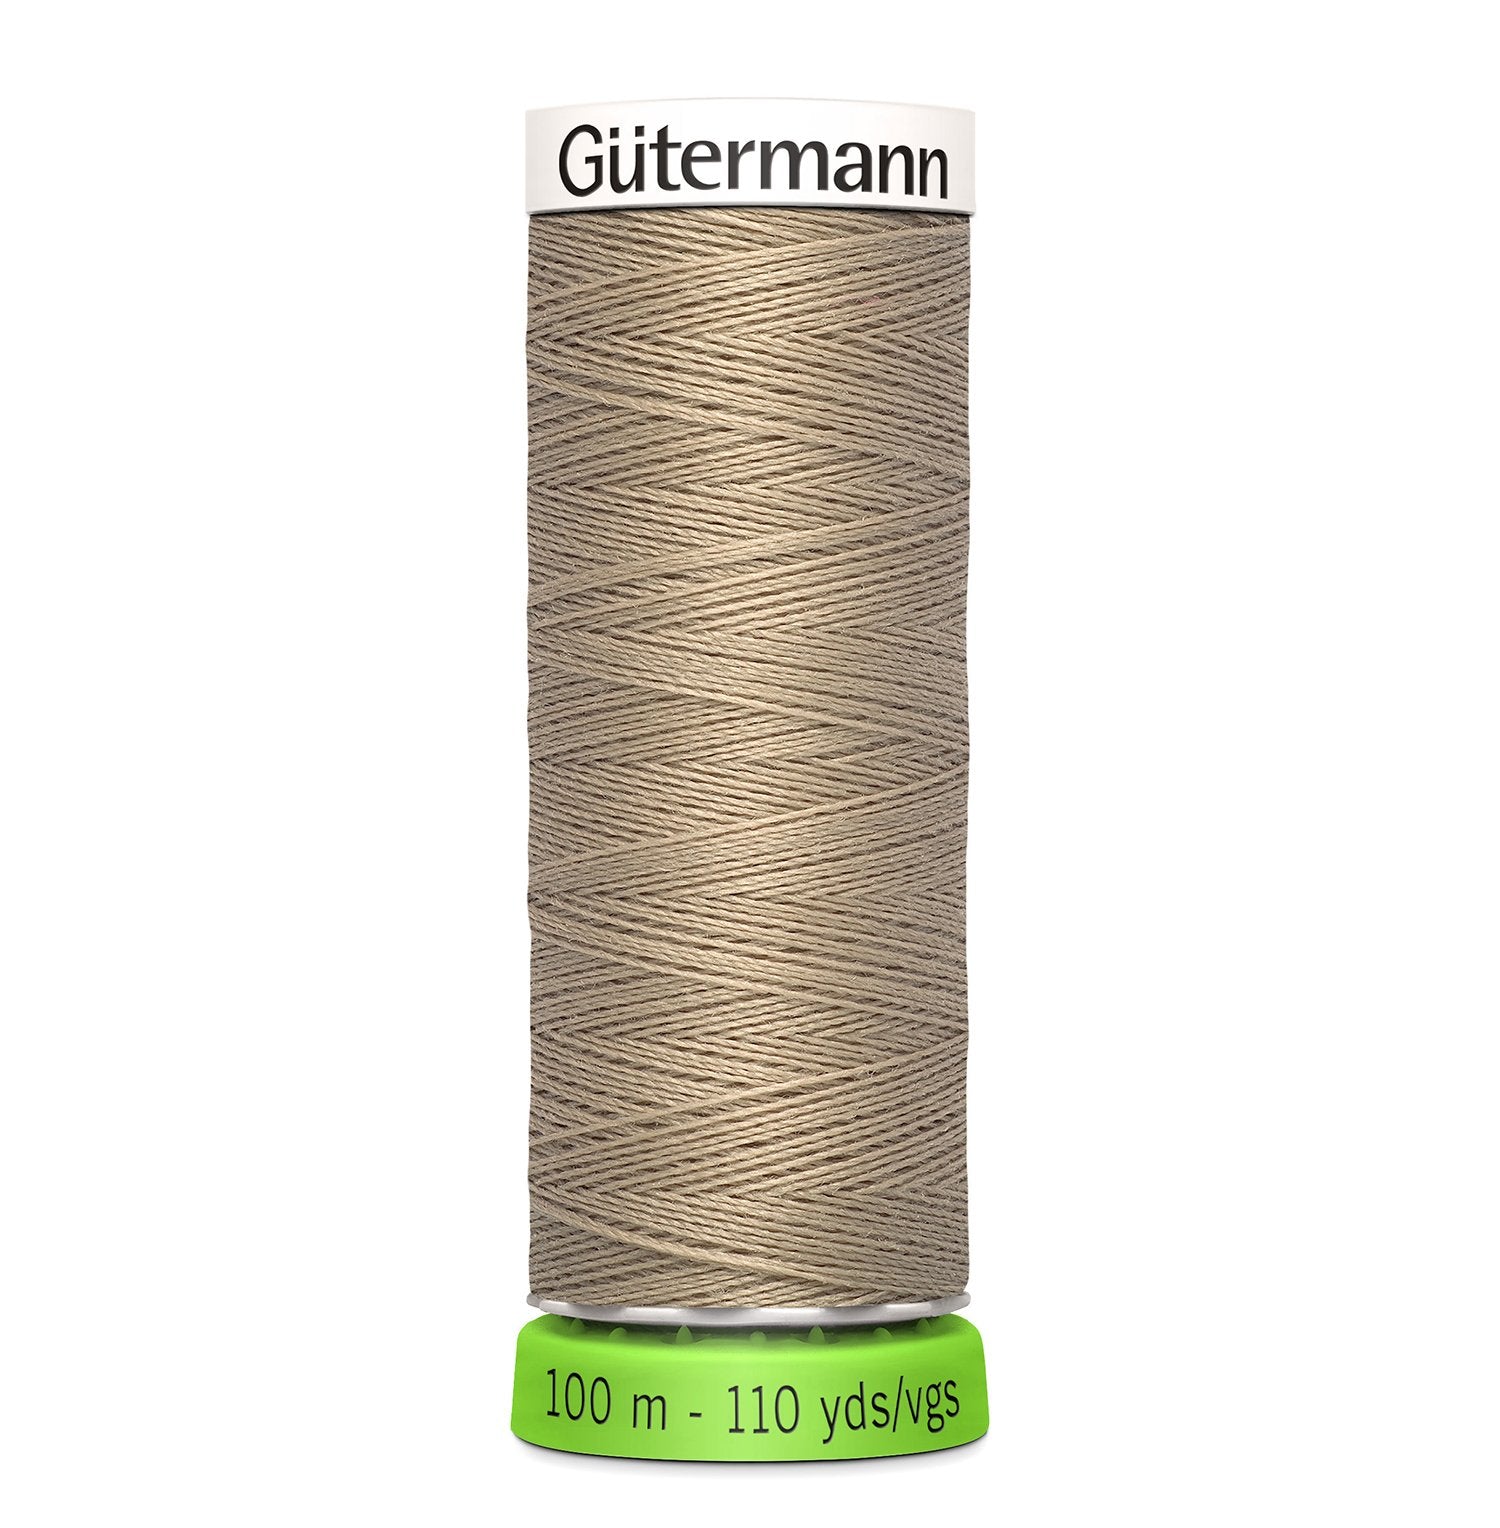 Gutermann Recycled Thread 100m, Colour 464 from Jaycotts Sewing Supplies